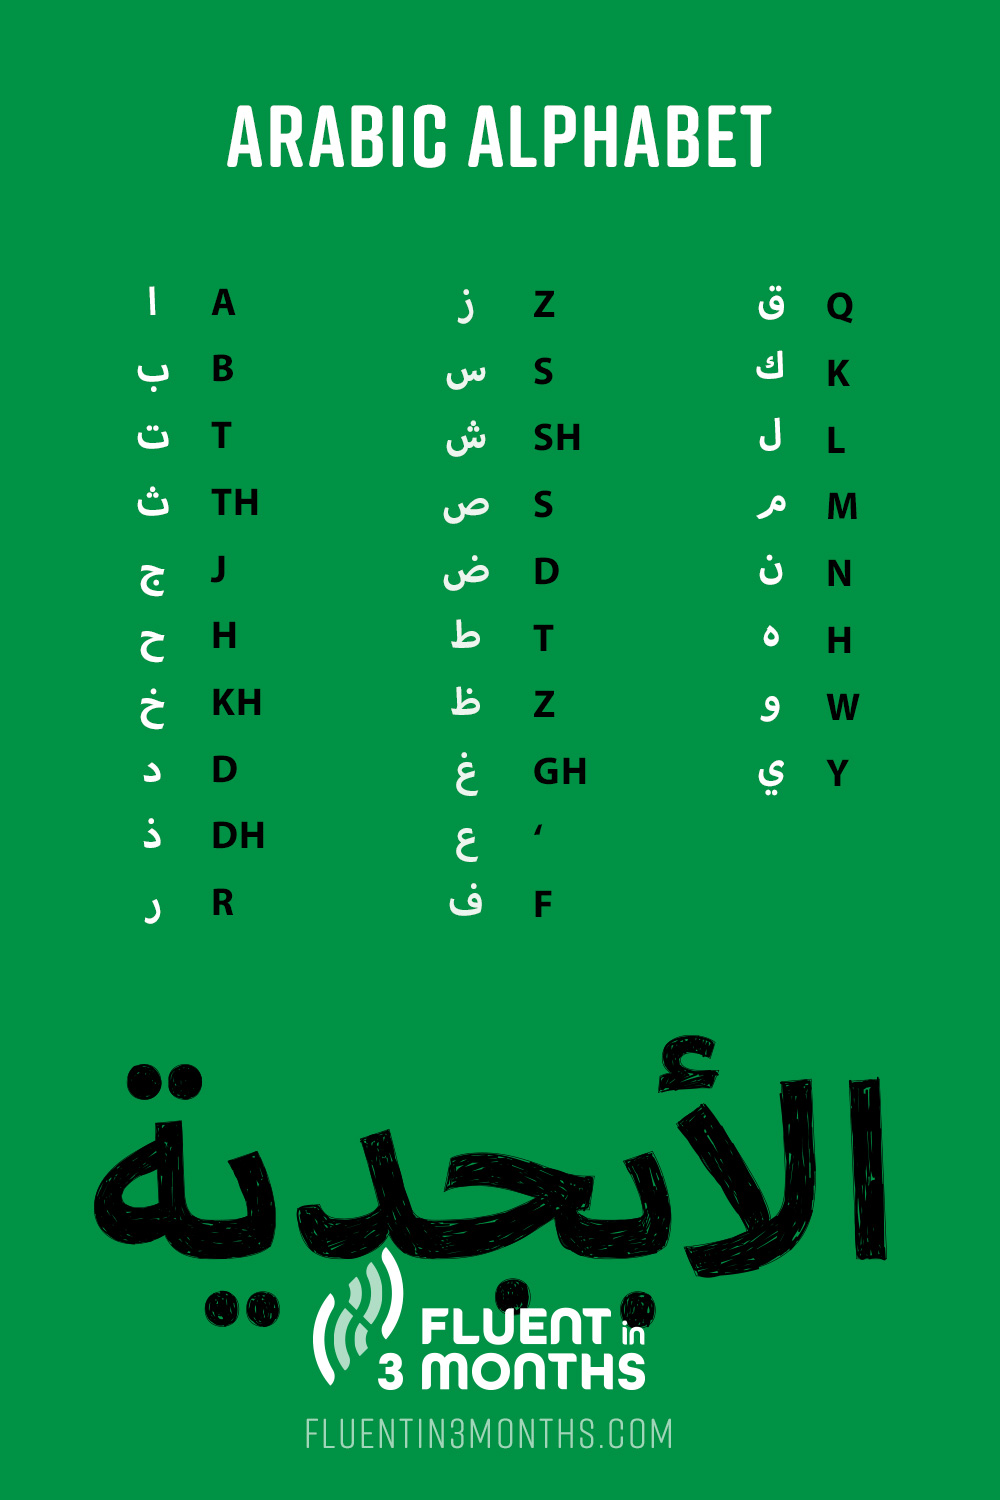 Arabic Alphabet: The Guide to Learning the Arabic Letters and Script